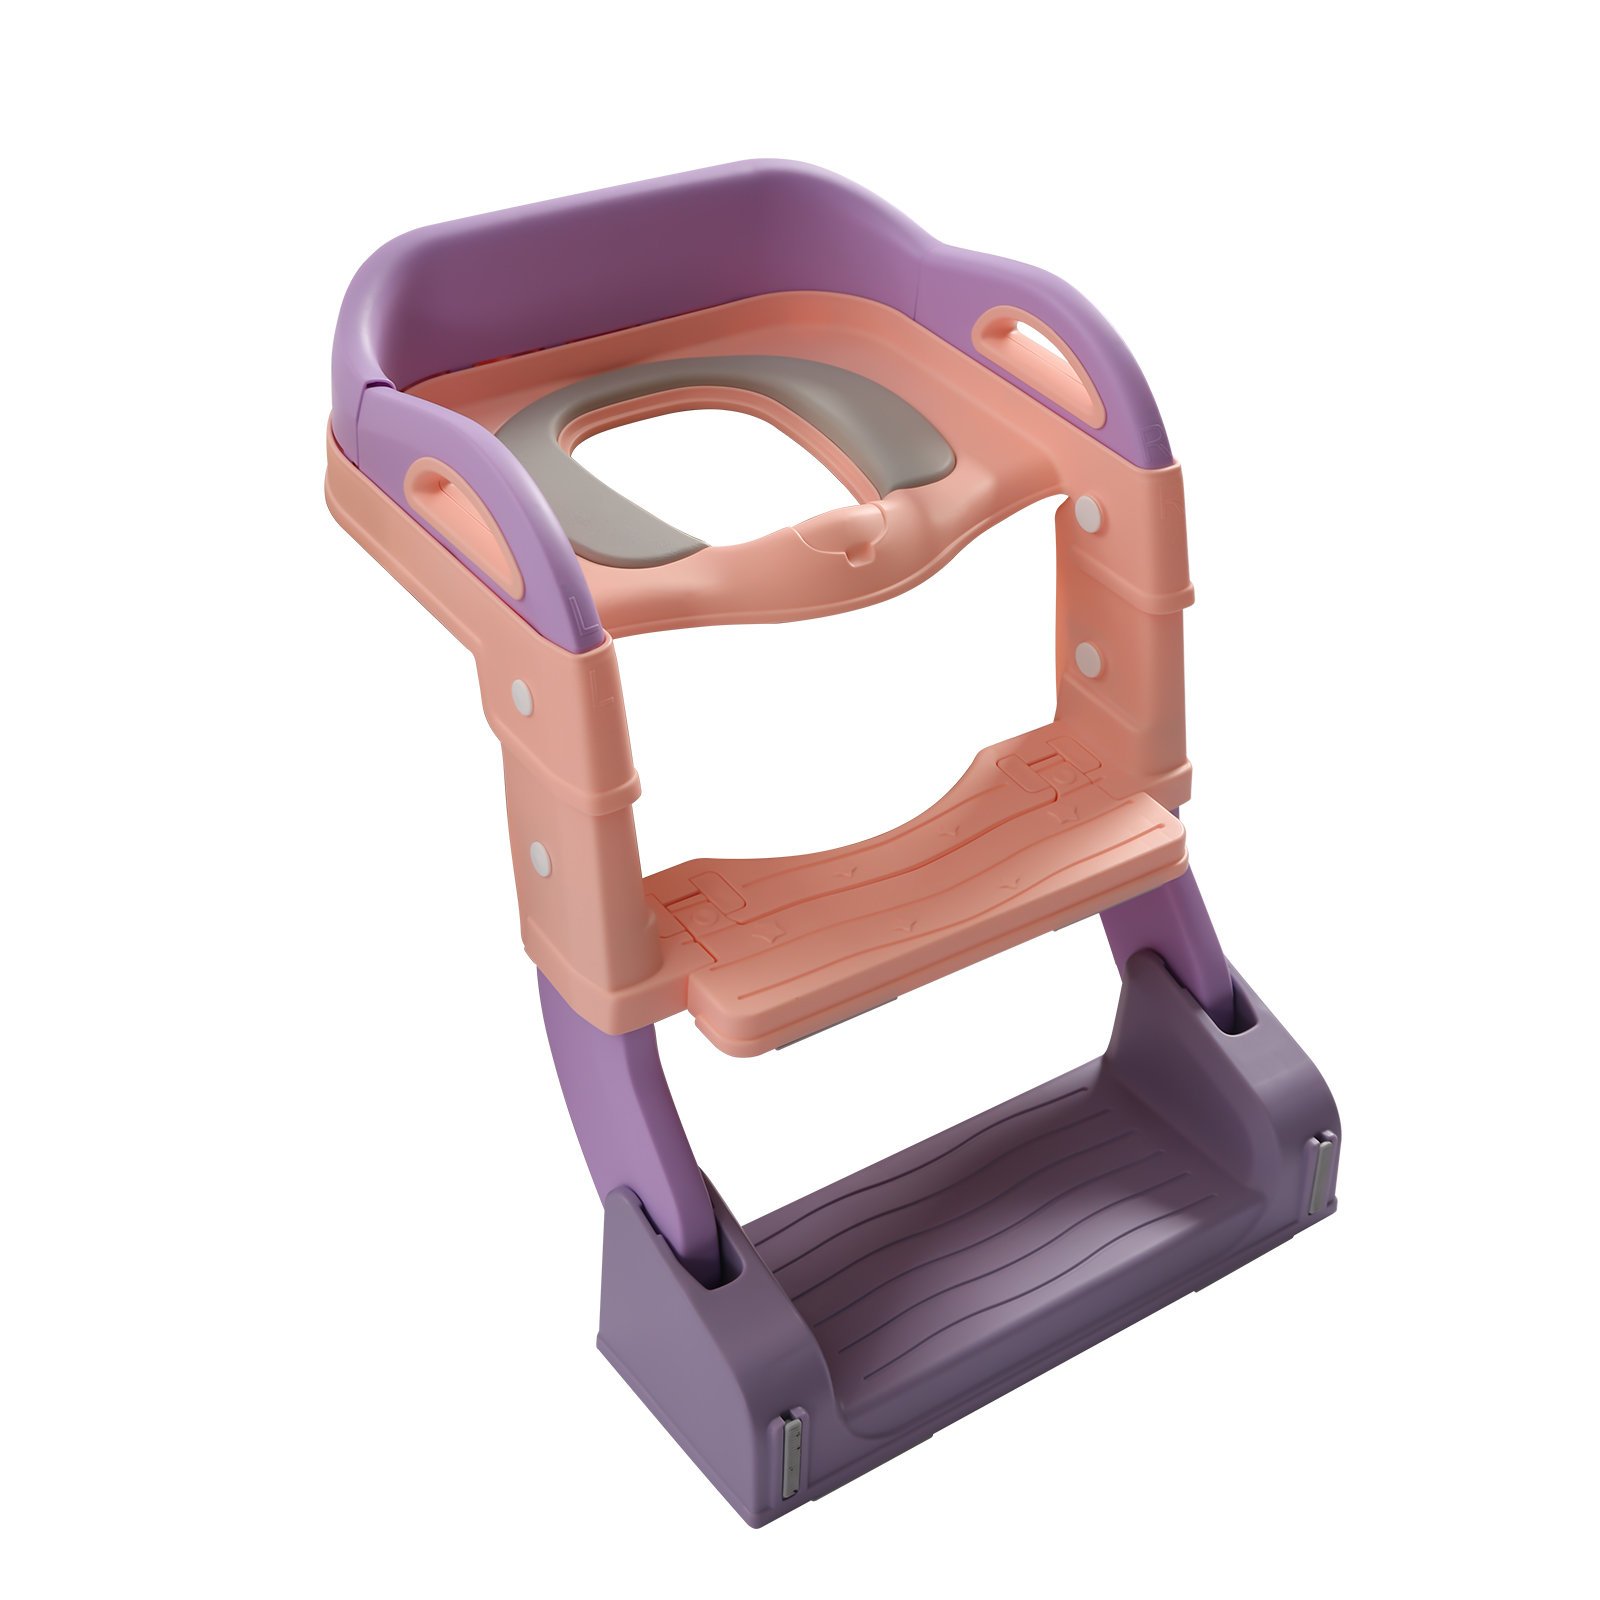 Toilet Ladder Folding Children's Potty Training Toilet Baby Seat Urinal  Chair With Adjustable Step Stool Ladder Comfortable Safe